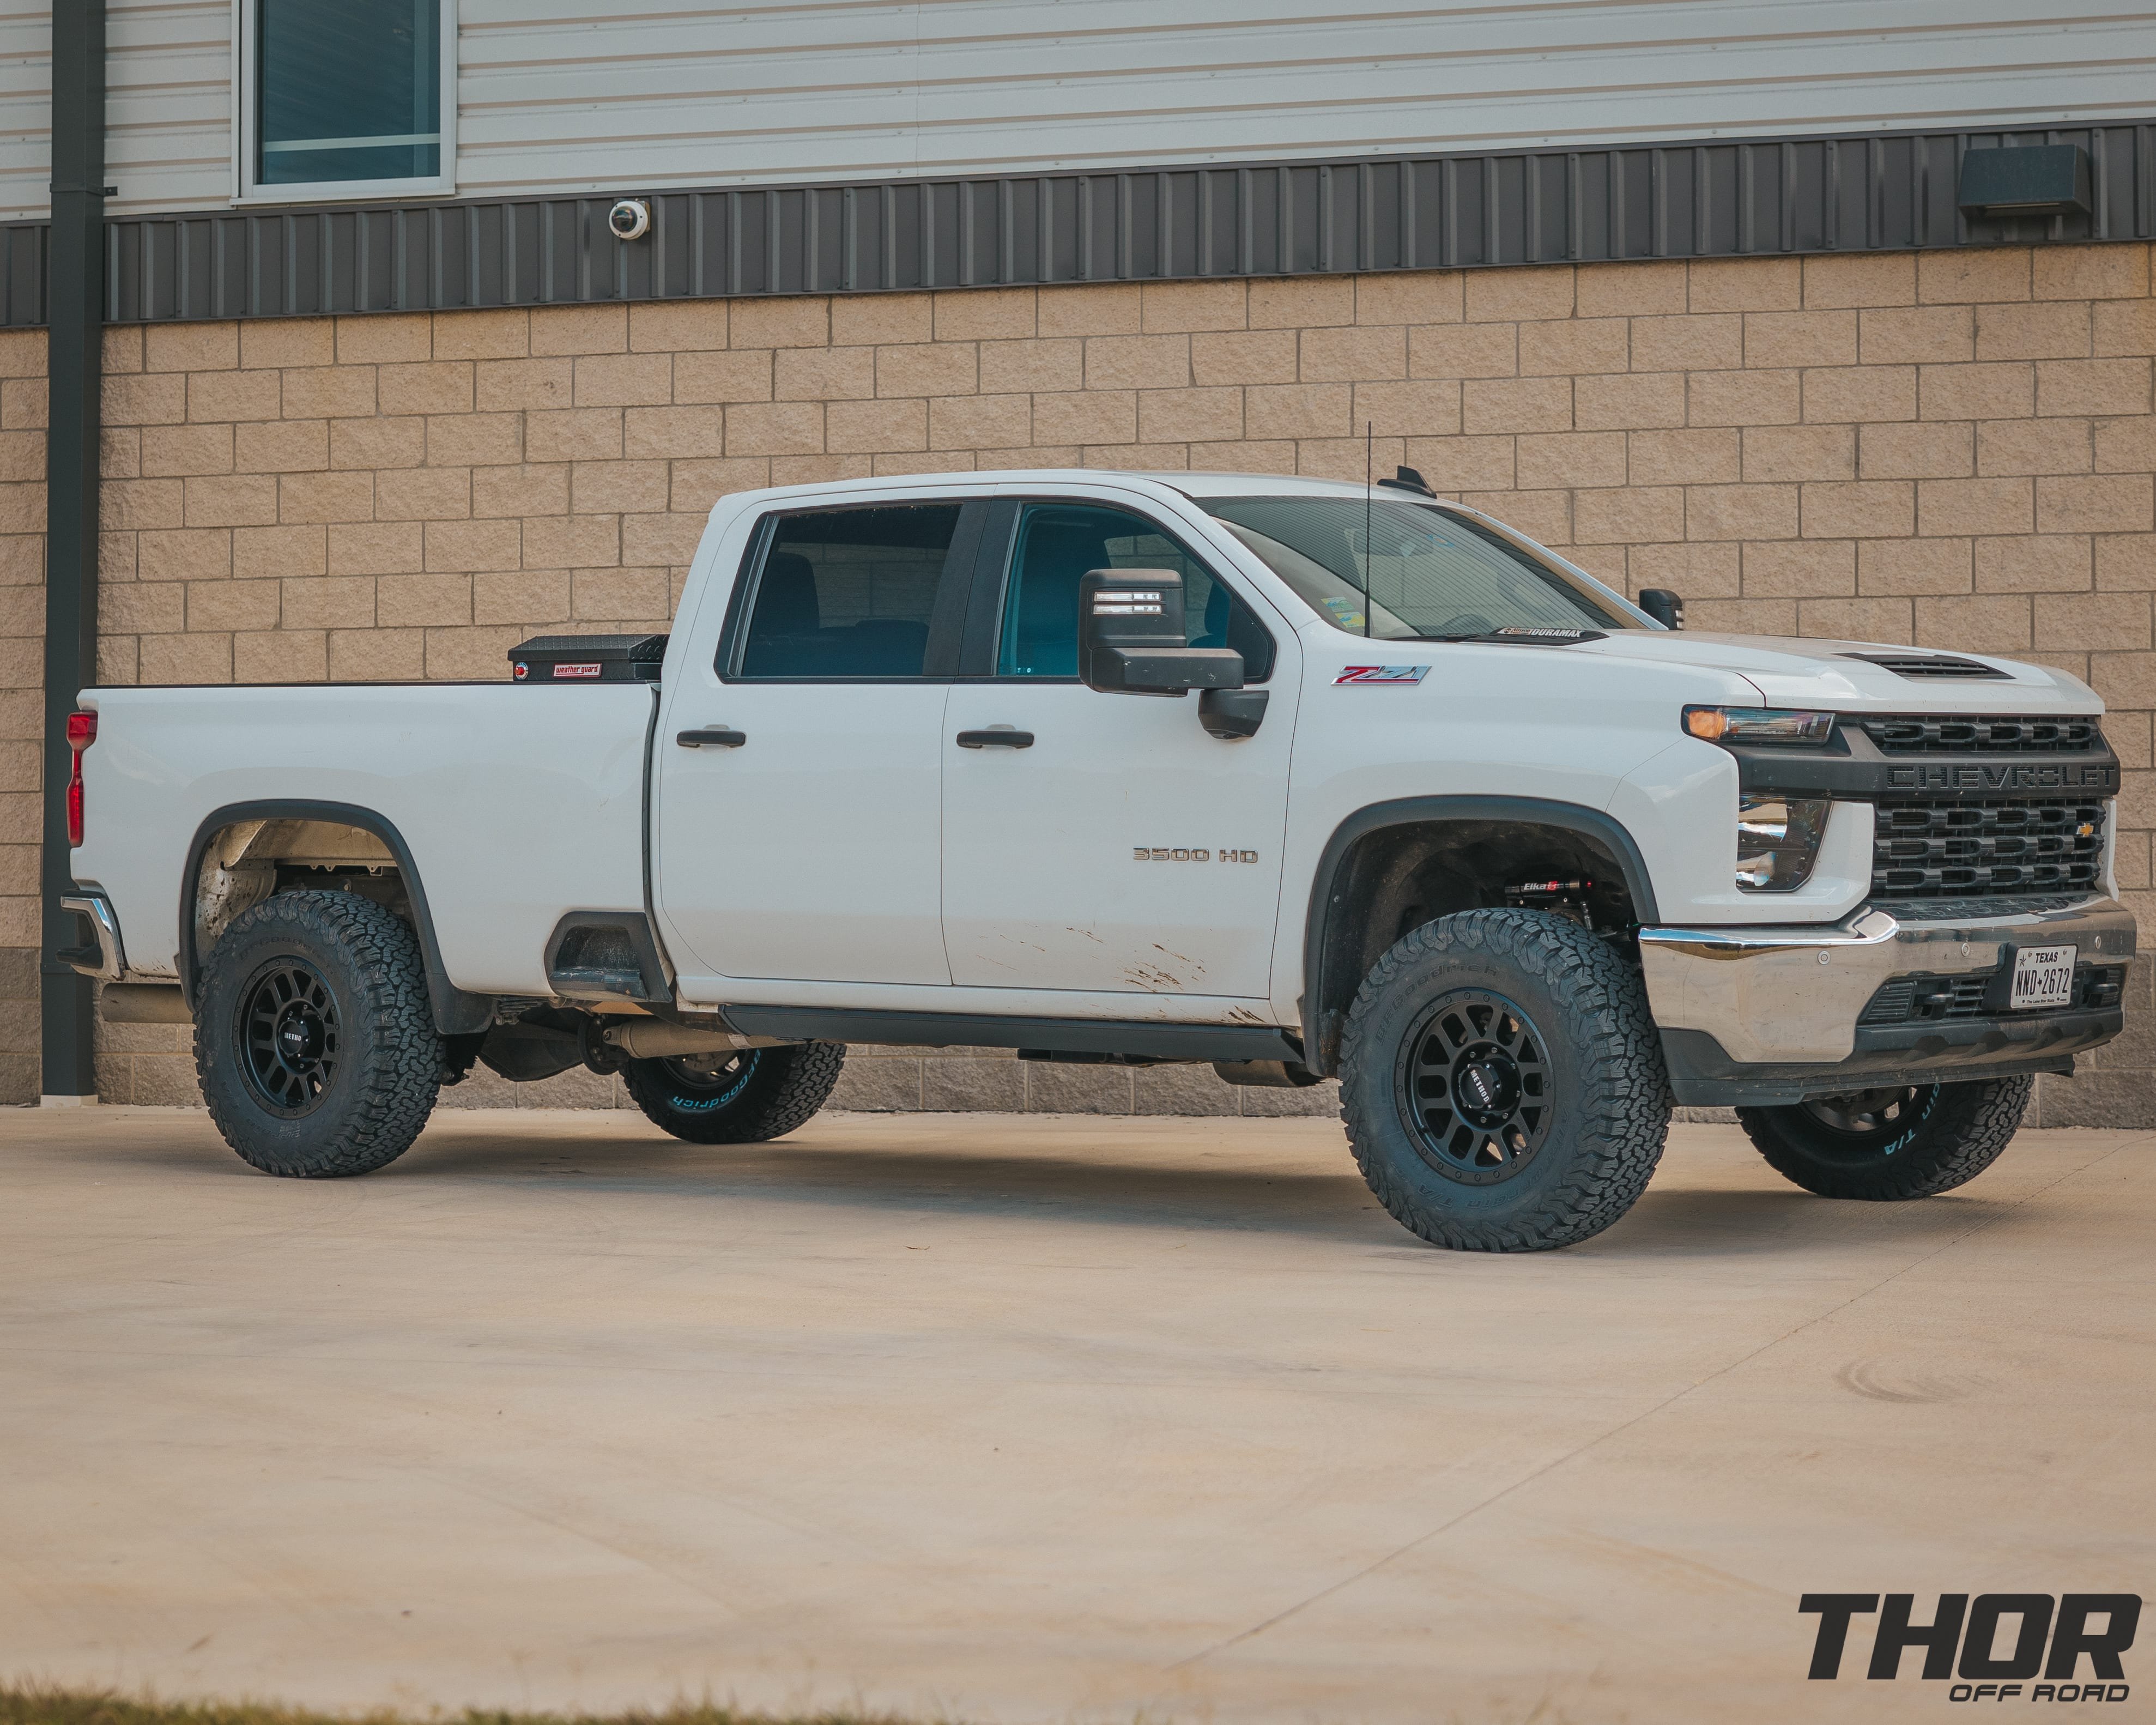 2022 Chevrolet Silverado 2500 HD WT in White with Cognito 3" Elite Suspension Kit with Elka Reservoirs, AMP Research Steps, WeatherGuard Toolbox, Method 18x9" MR309 Matte Black Wheels, 35x12.50R18 BF Goodrich A/T KO2 Tires